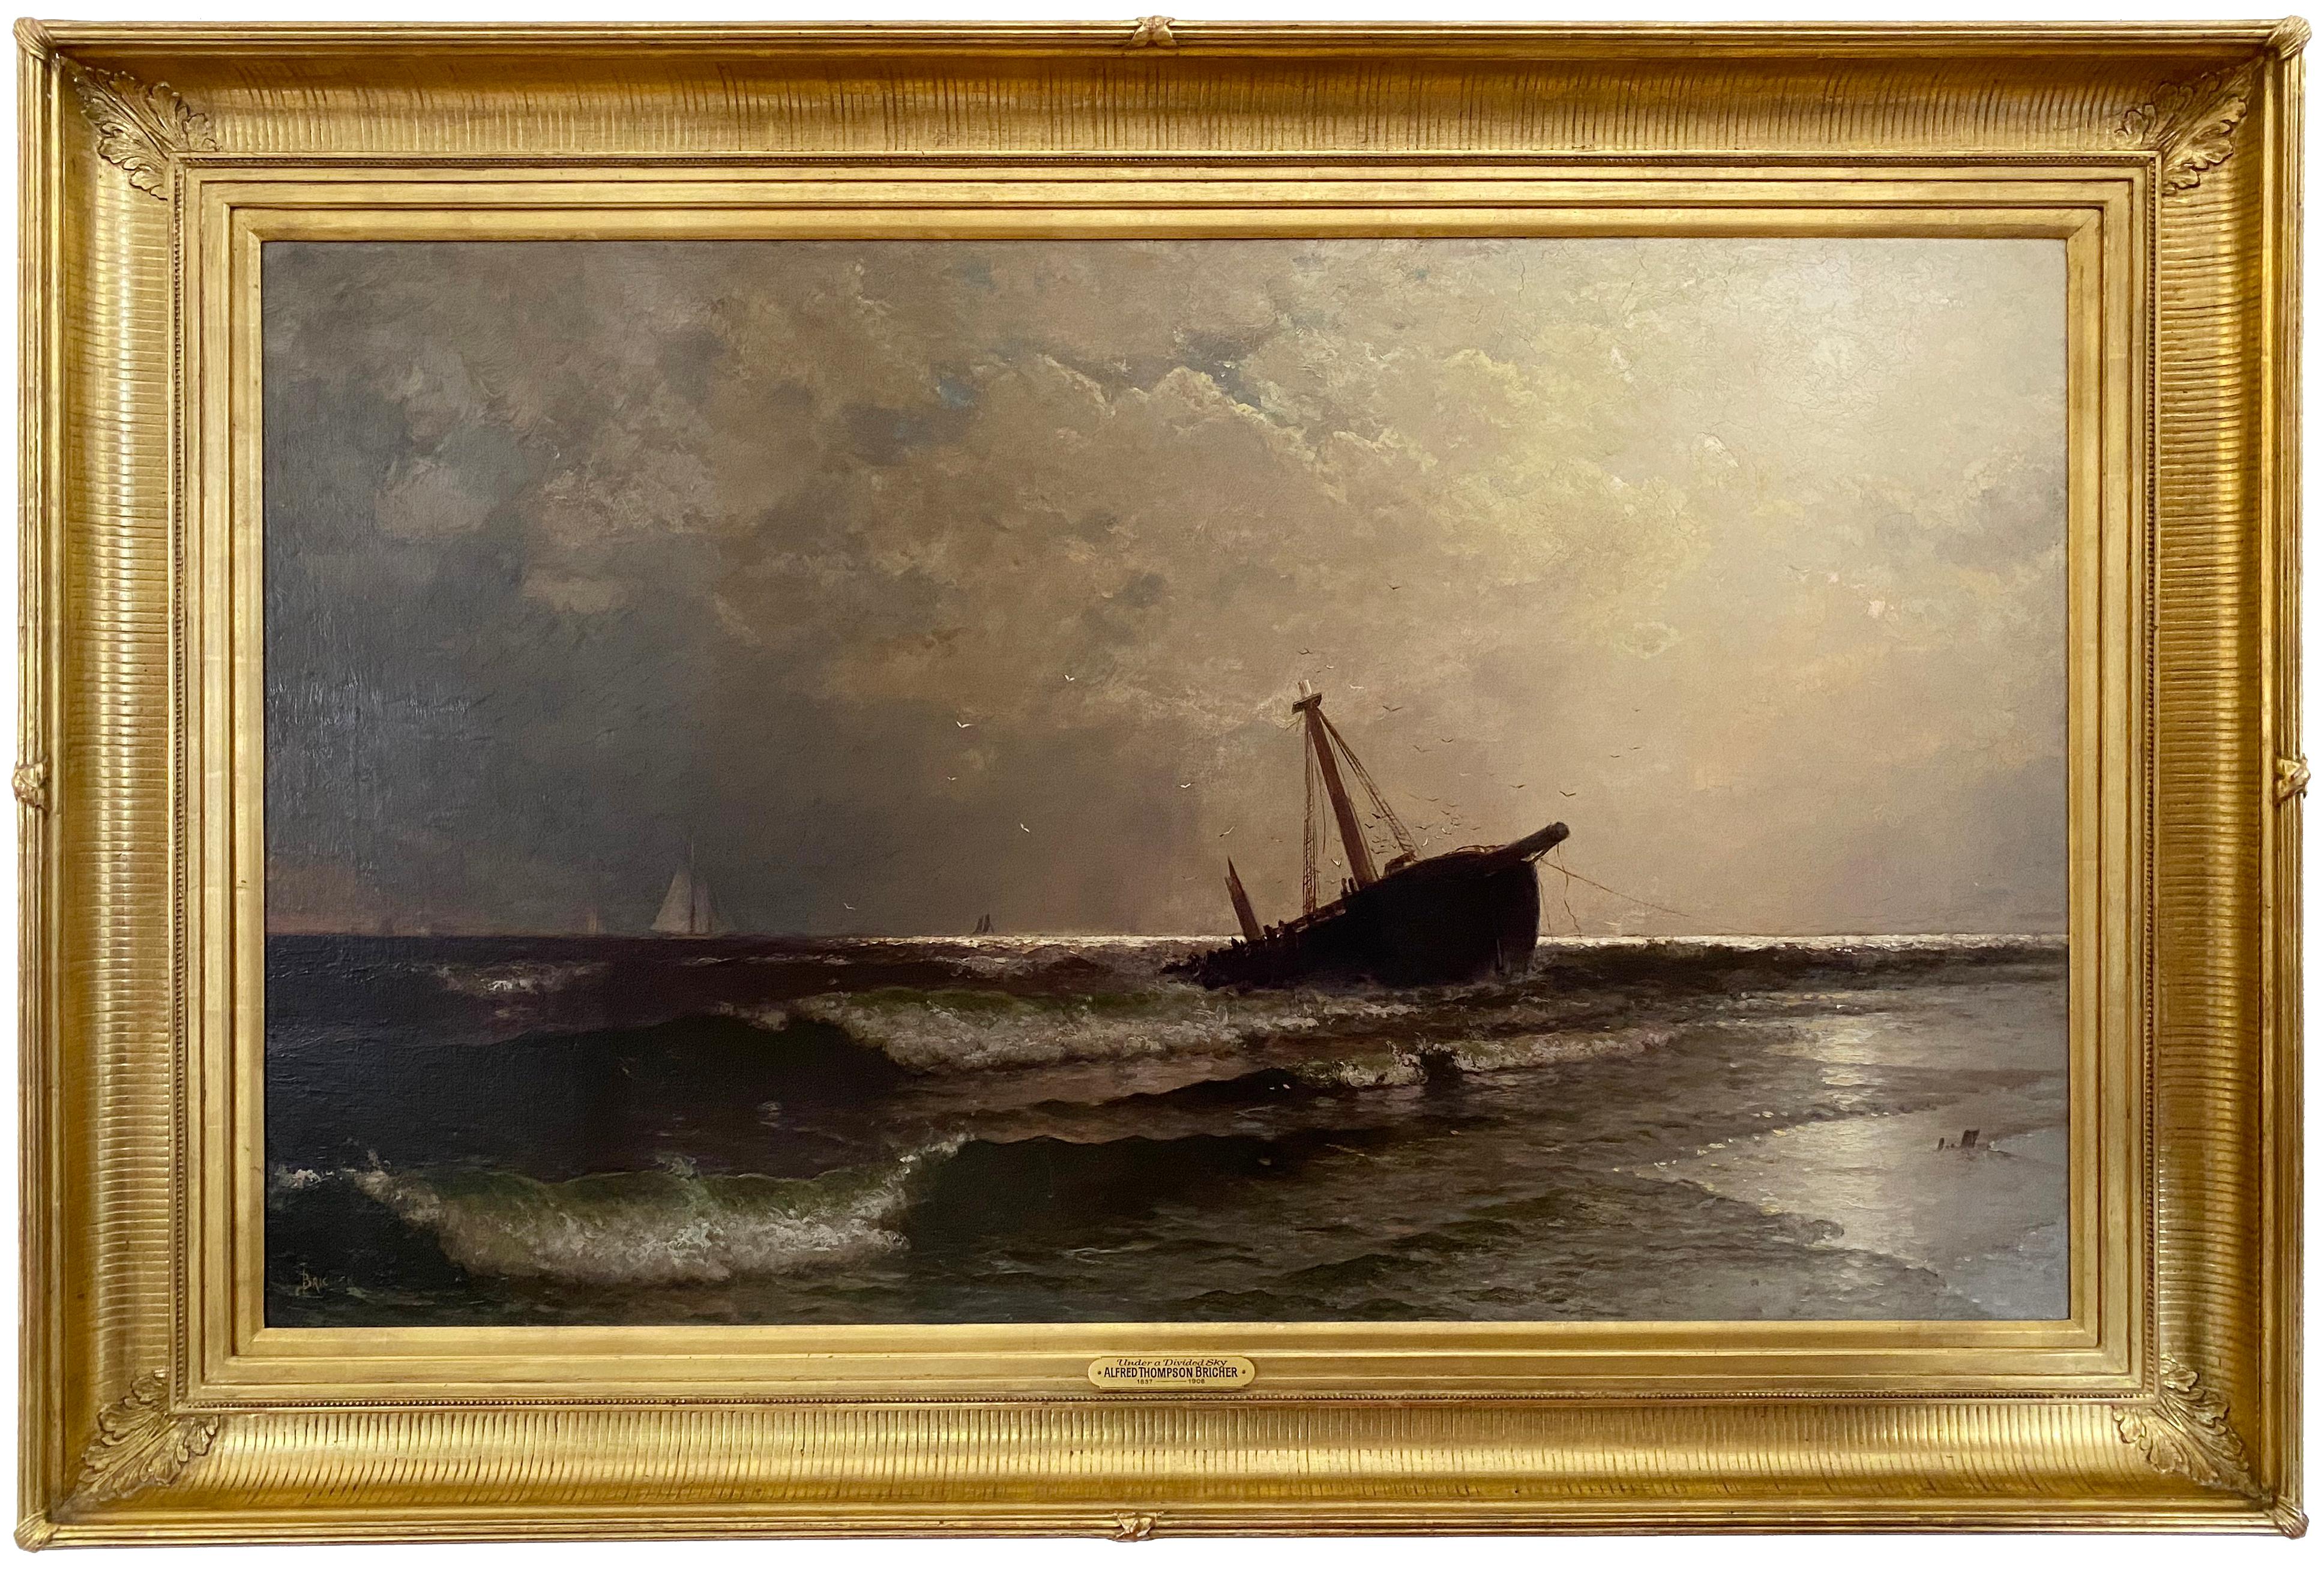 Under a Divided Sky, Seascape of Shipwreck